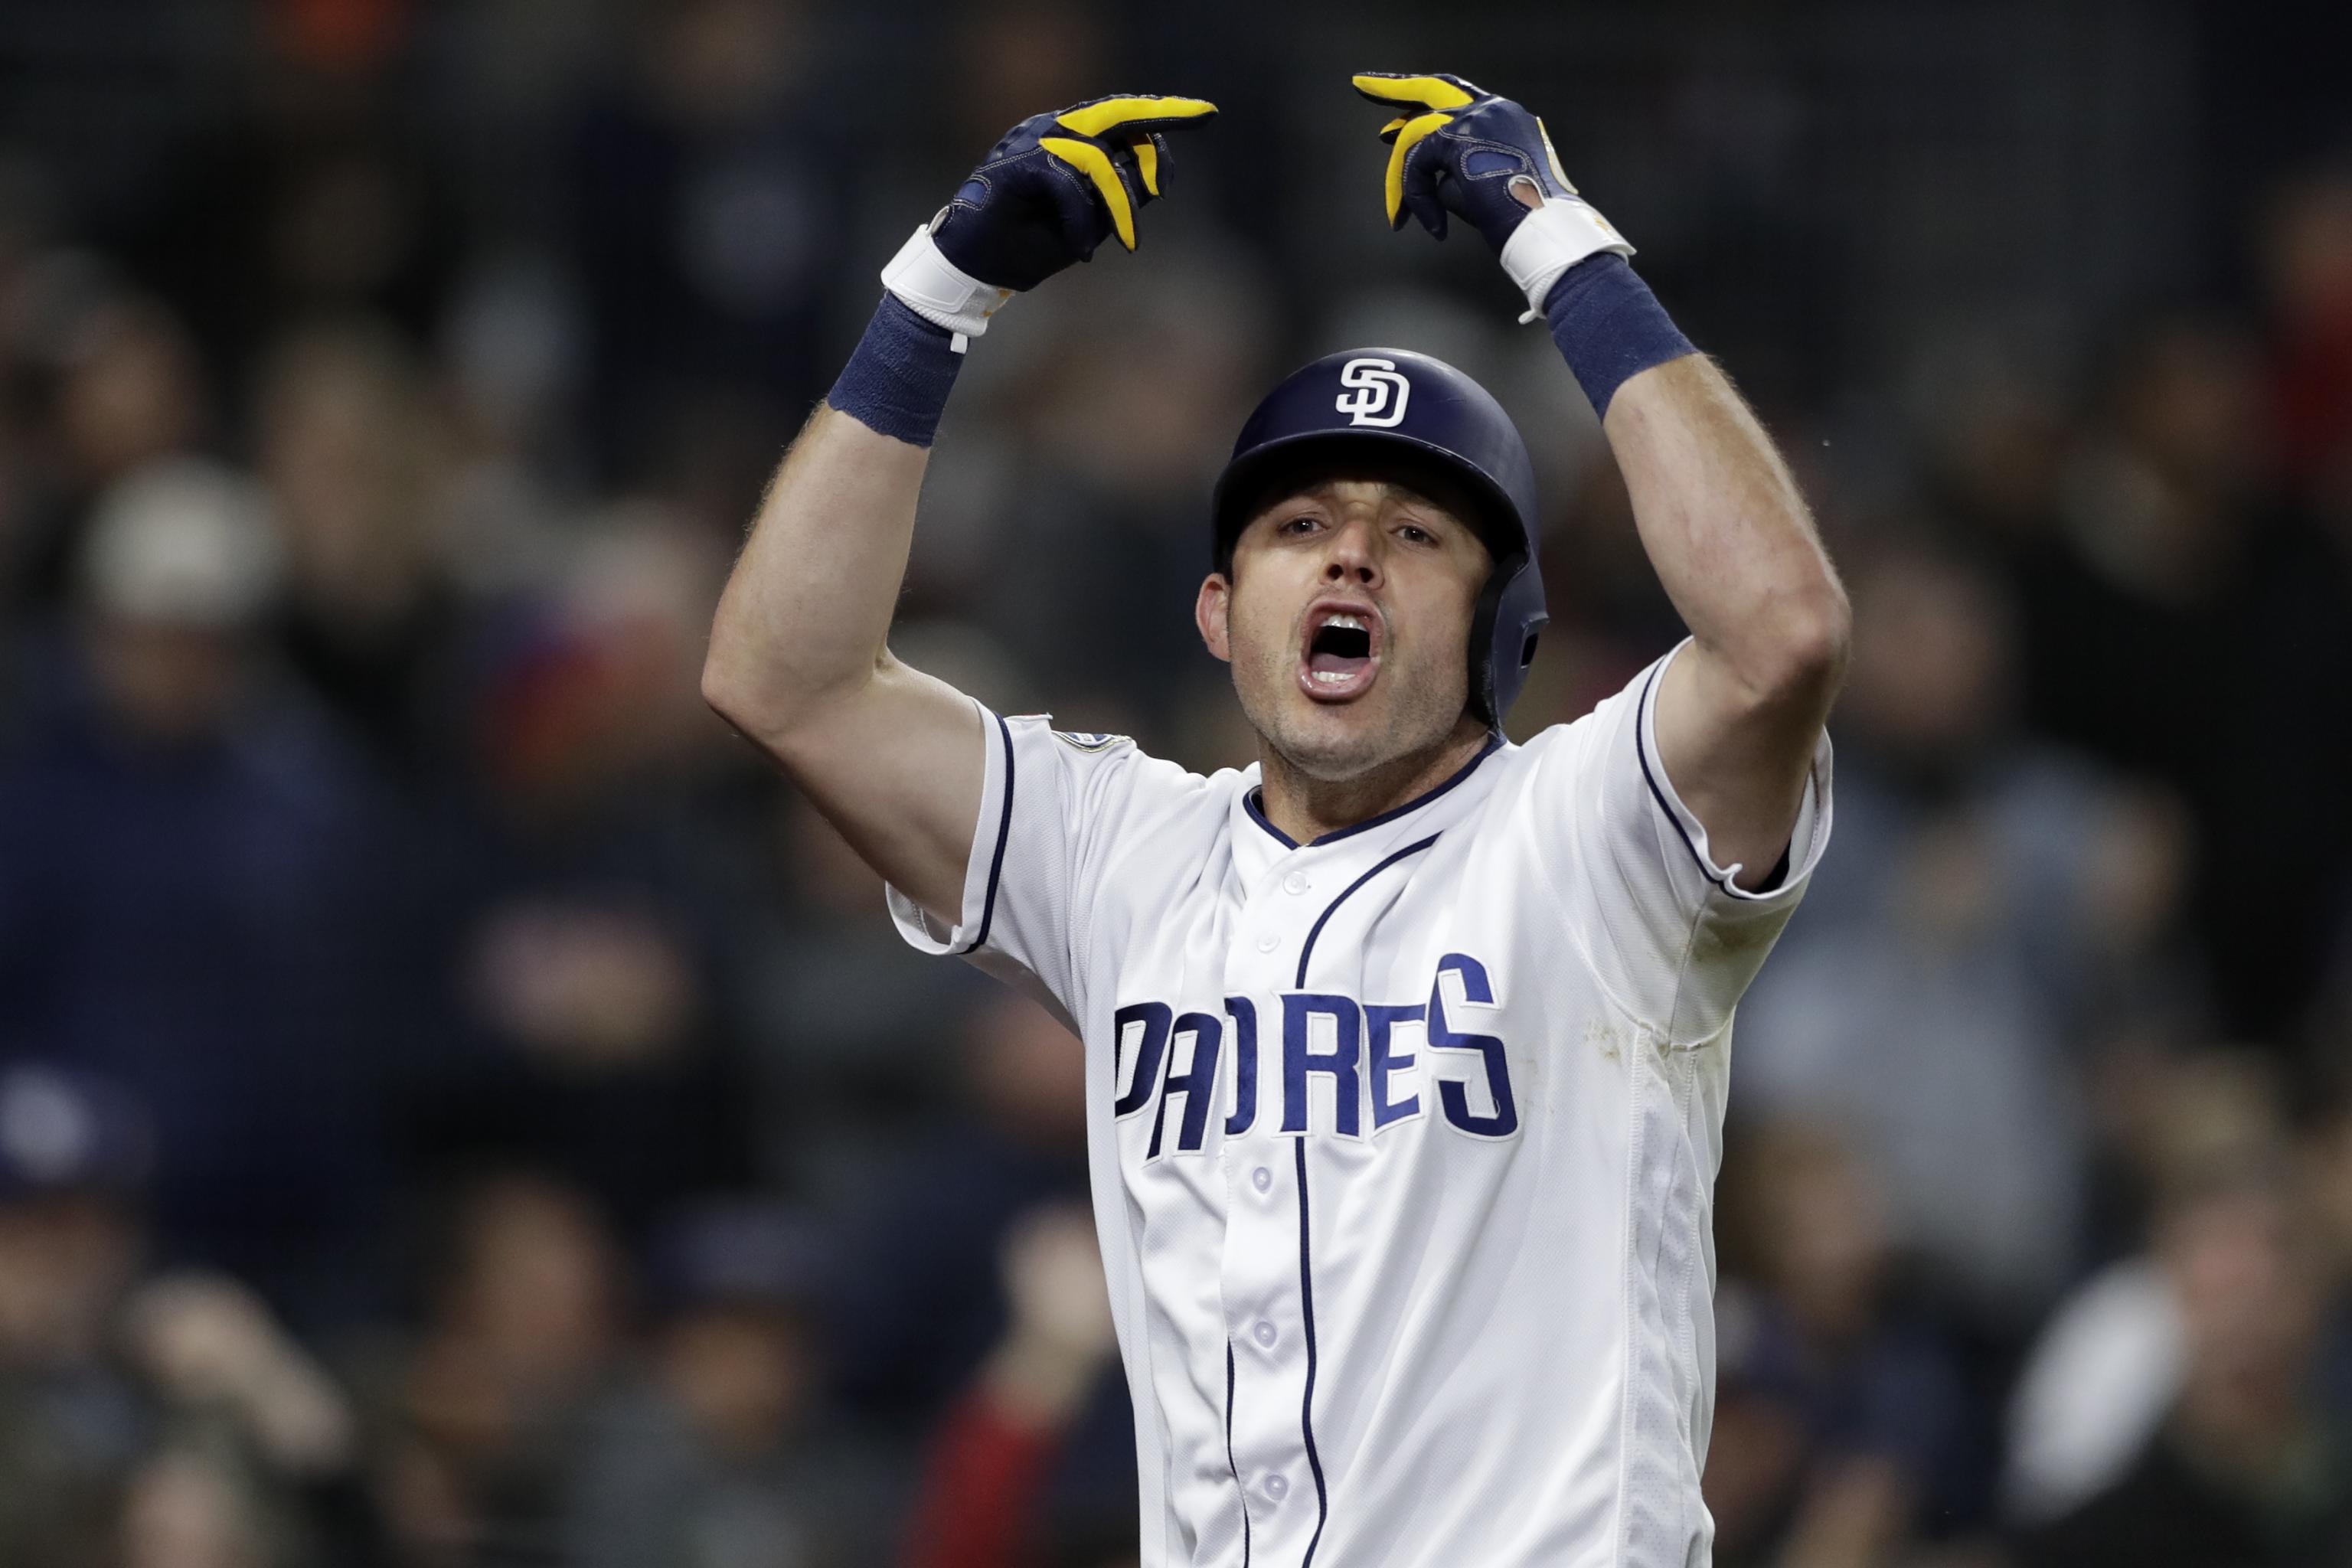 Report: Padres agree to deal with Kinsler 